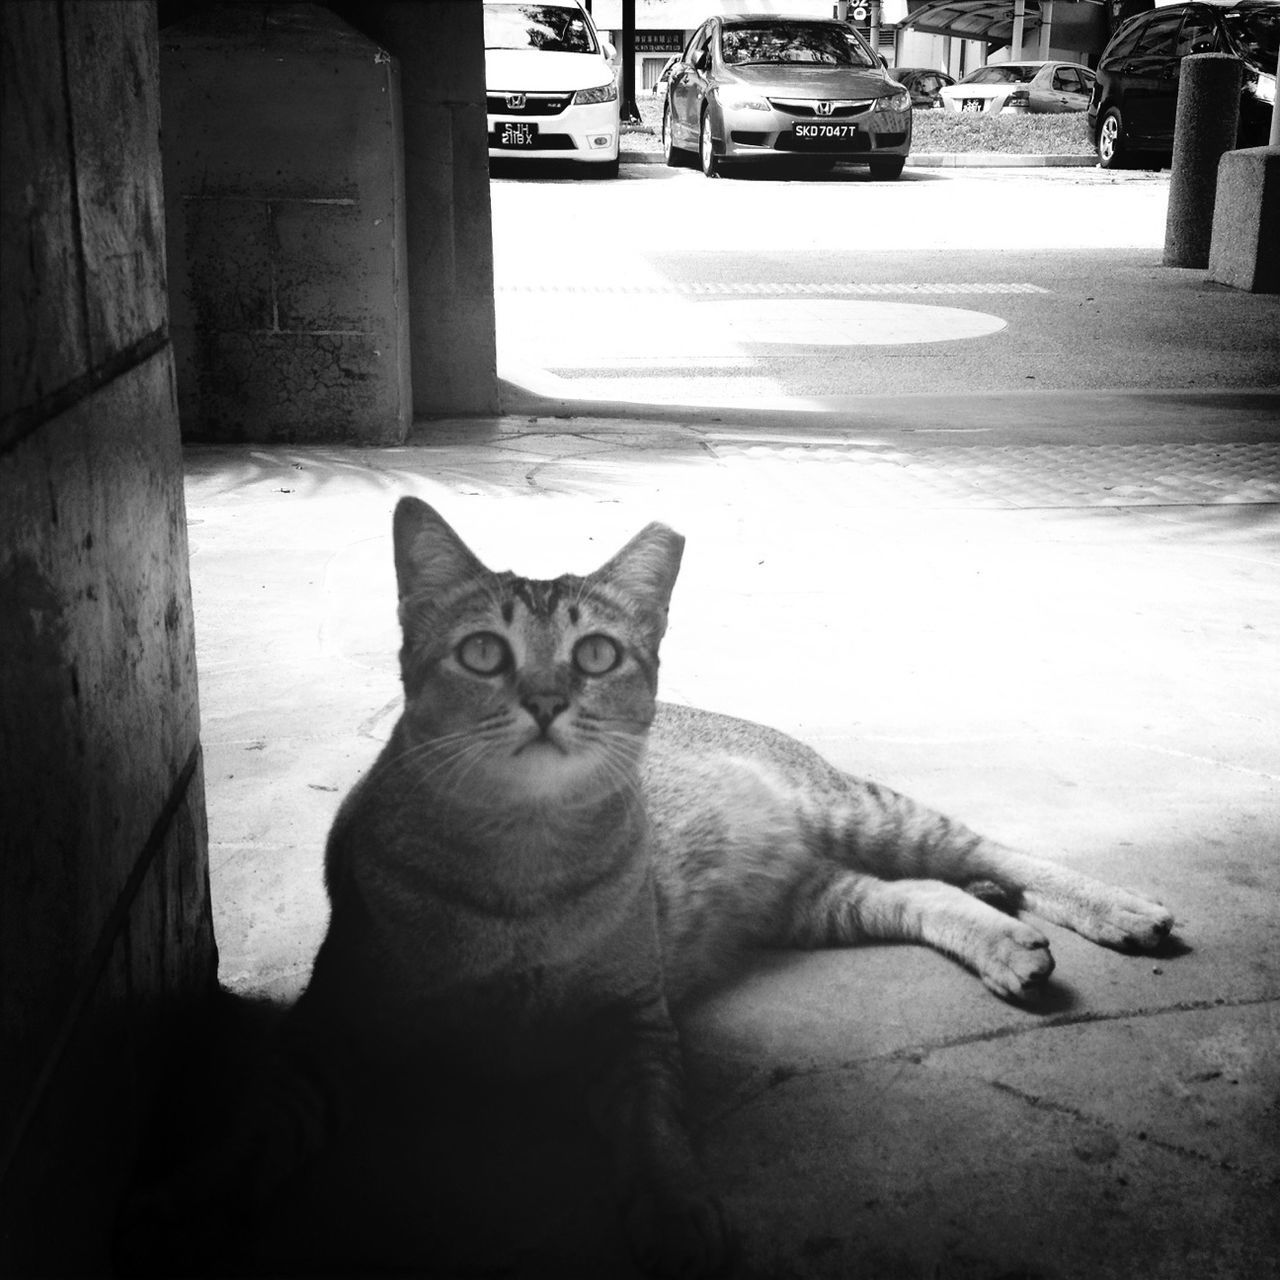 pets, domestic cat, domestic animals, cat, mammal, one animal, animal themes, feline, whisker, portrait, looking at camera, sitting, relaxation, architecture, built structure, street, building exterior, alertness, no people